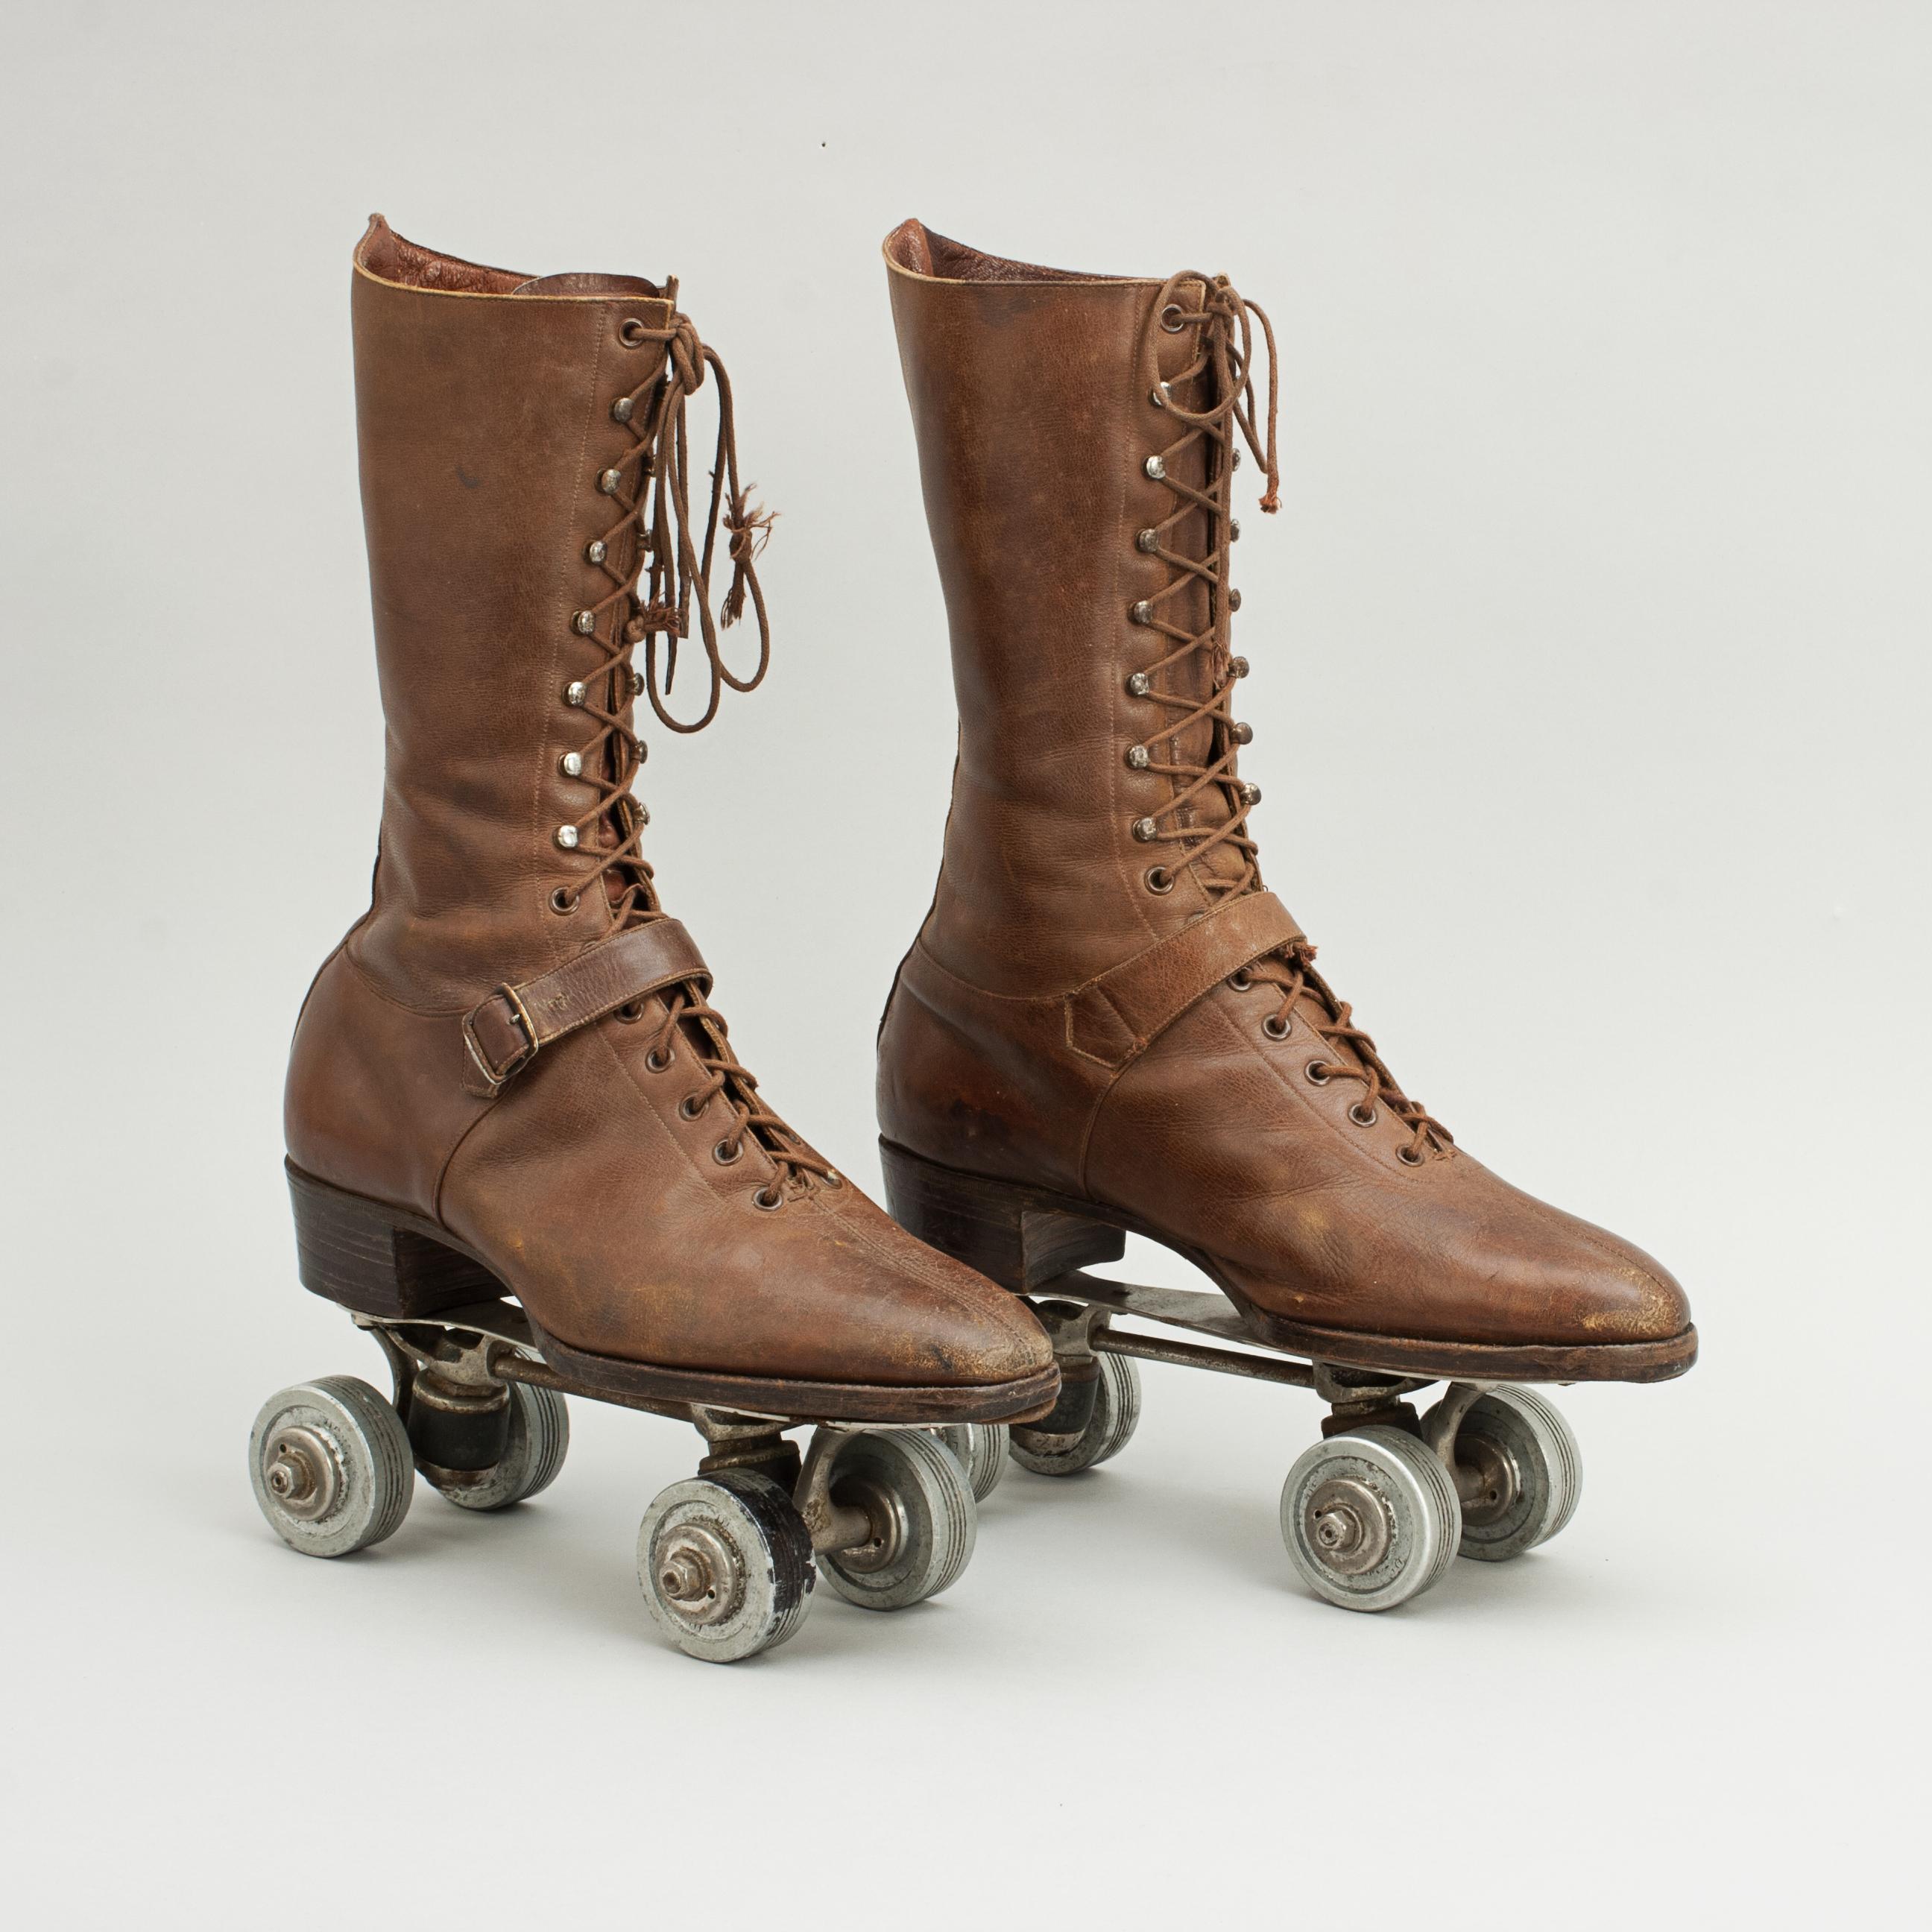 Vintage ladies roller skates.
Pair of early 'Dexter Roller Skates' with metal wheels. The base of the skates marked 'Dexter Skates'. The roller skates are screwed to a pair of ladies high top lace up brown leather boots, size 5. A great vintage